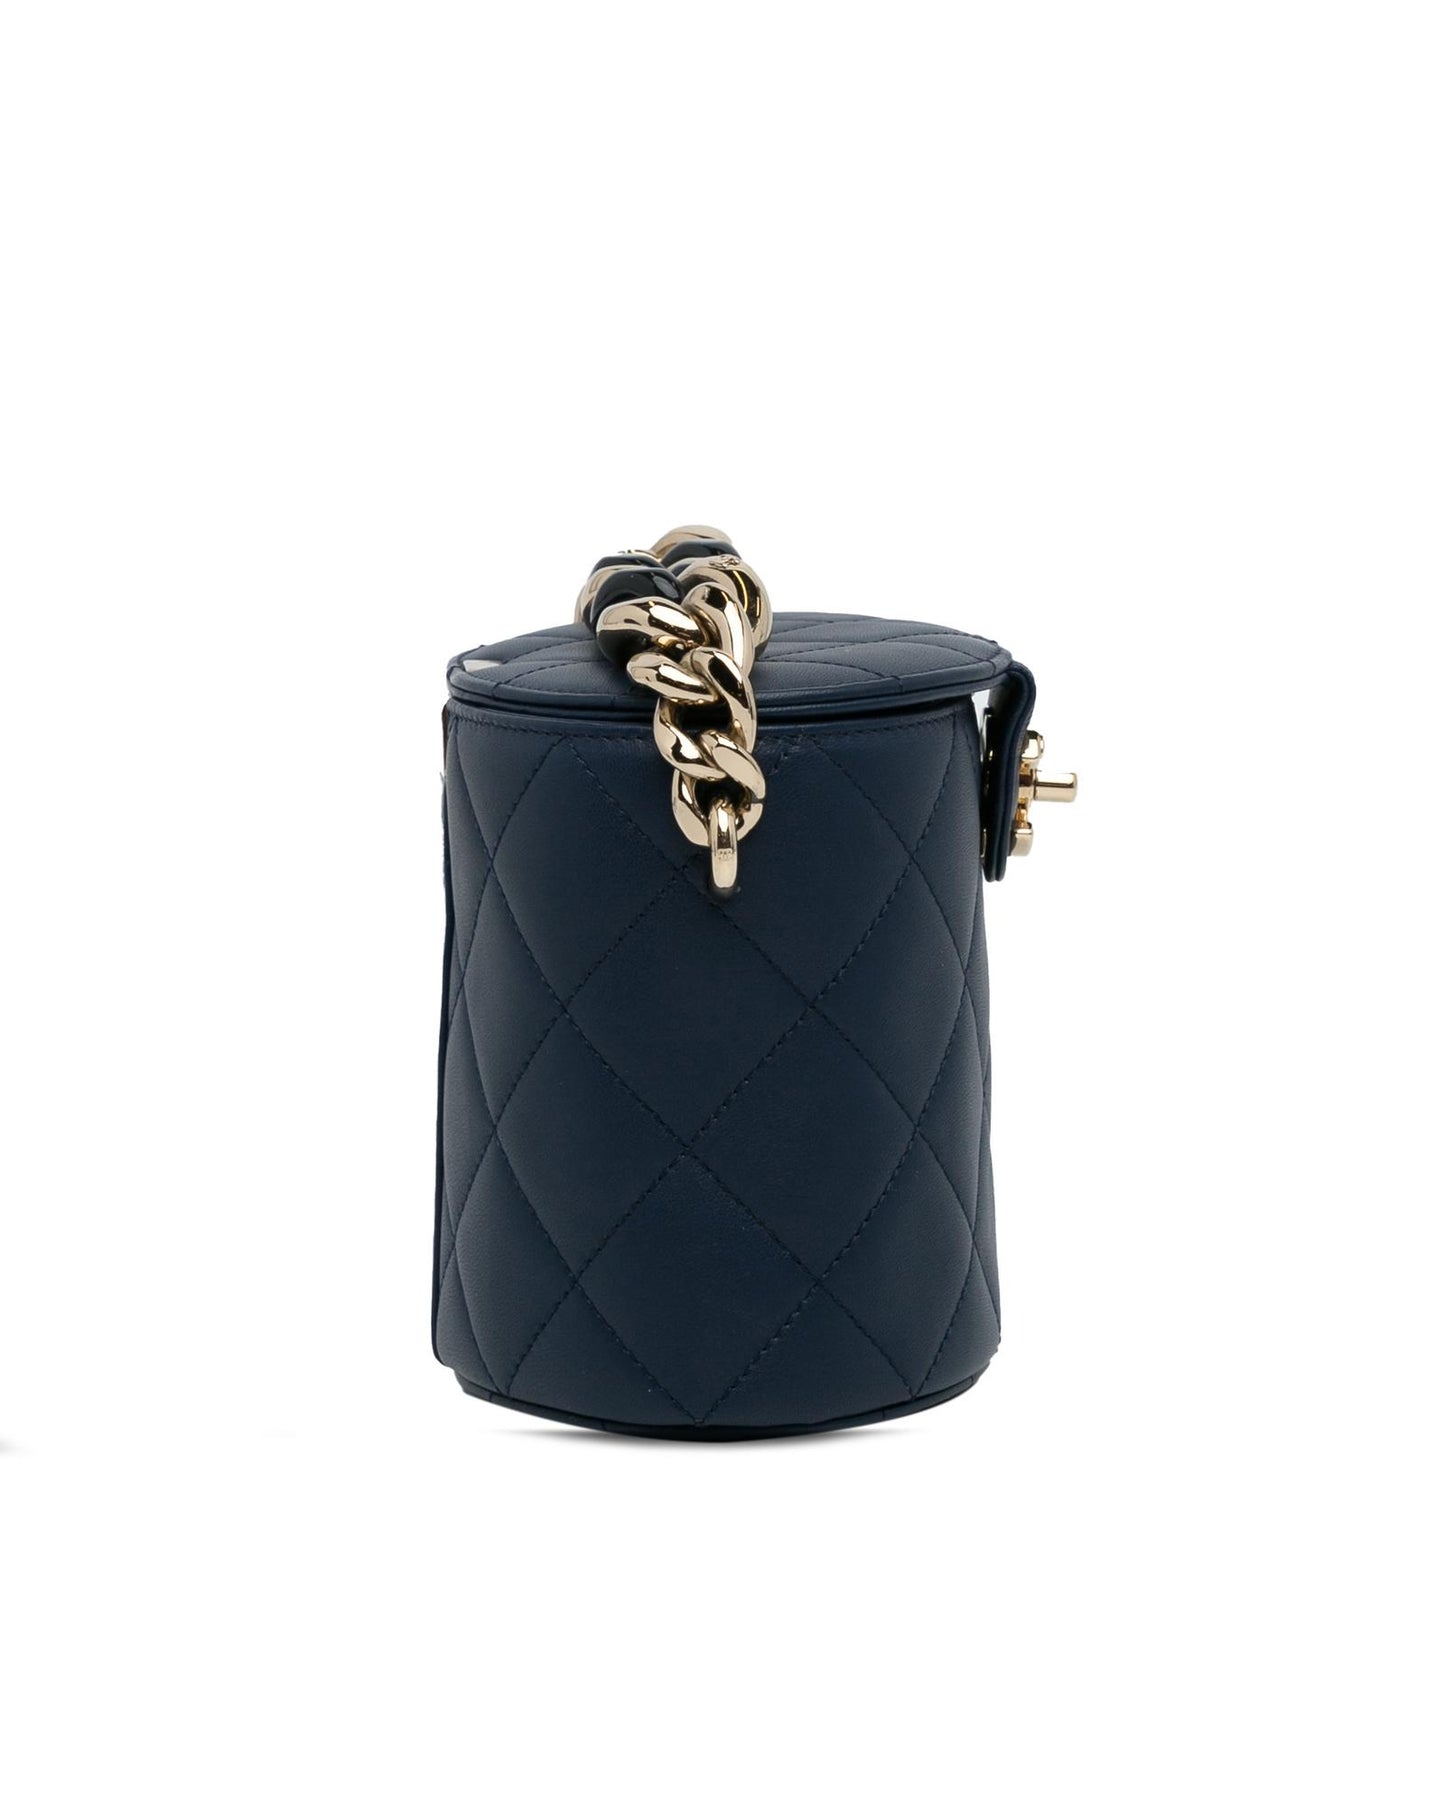 Chanel Women's Quilted Leather Chain Strap Vanity Bag in Blue